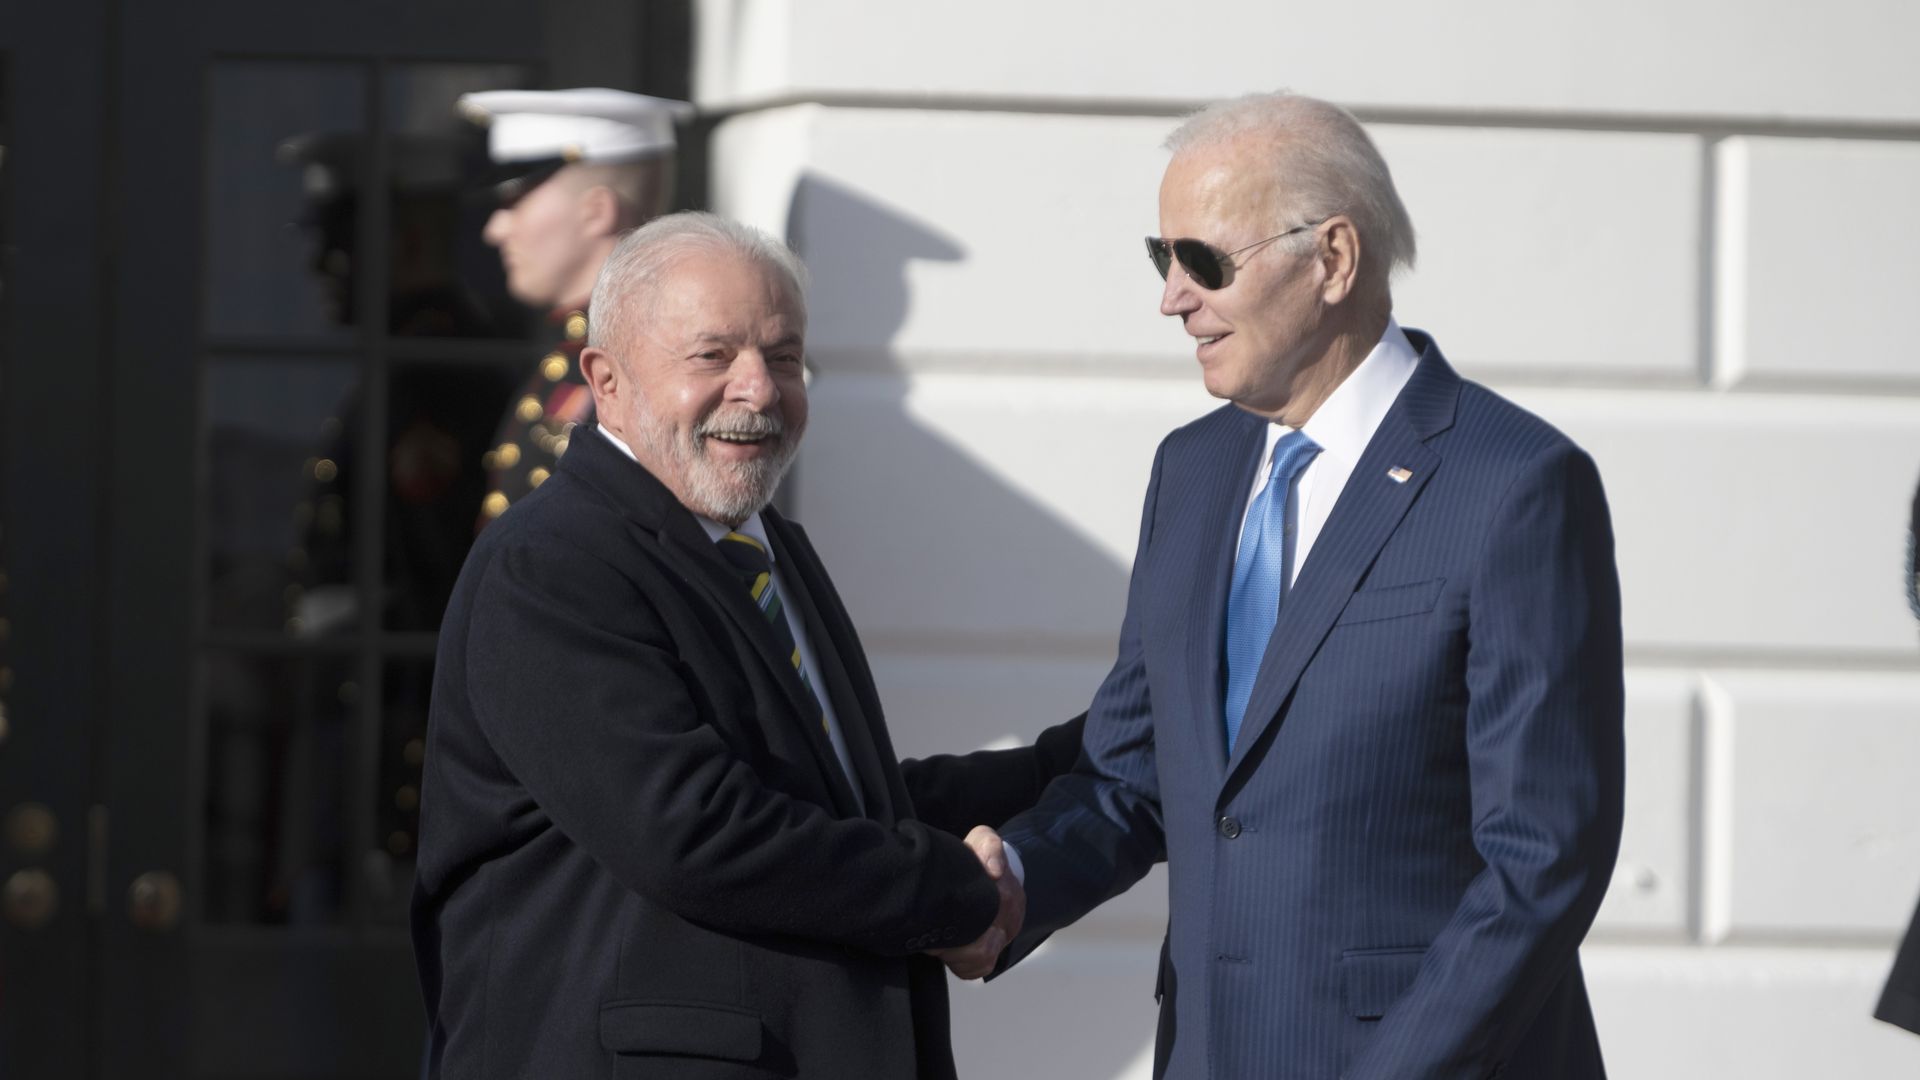 Brazil President Luiz Inácio Lula da Silva, wearing a black coat, smiles as he shakes hands with President Biden, who is in a navy blue suit and sunglasses. They are outside the White House. 